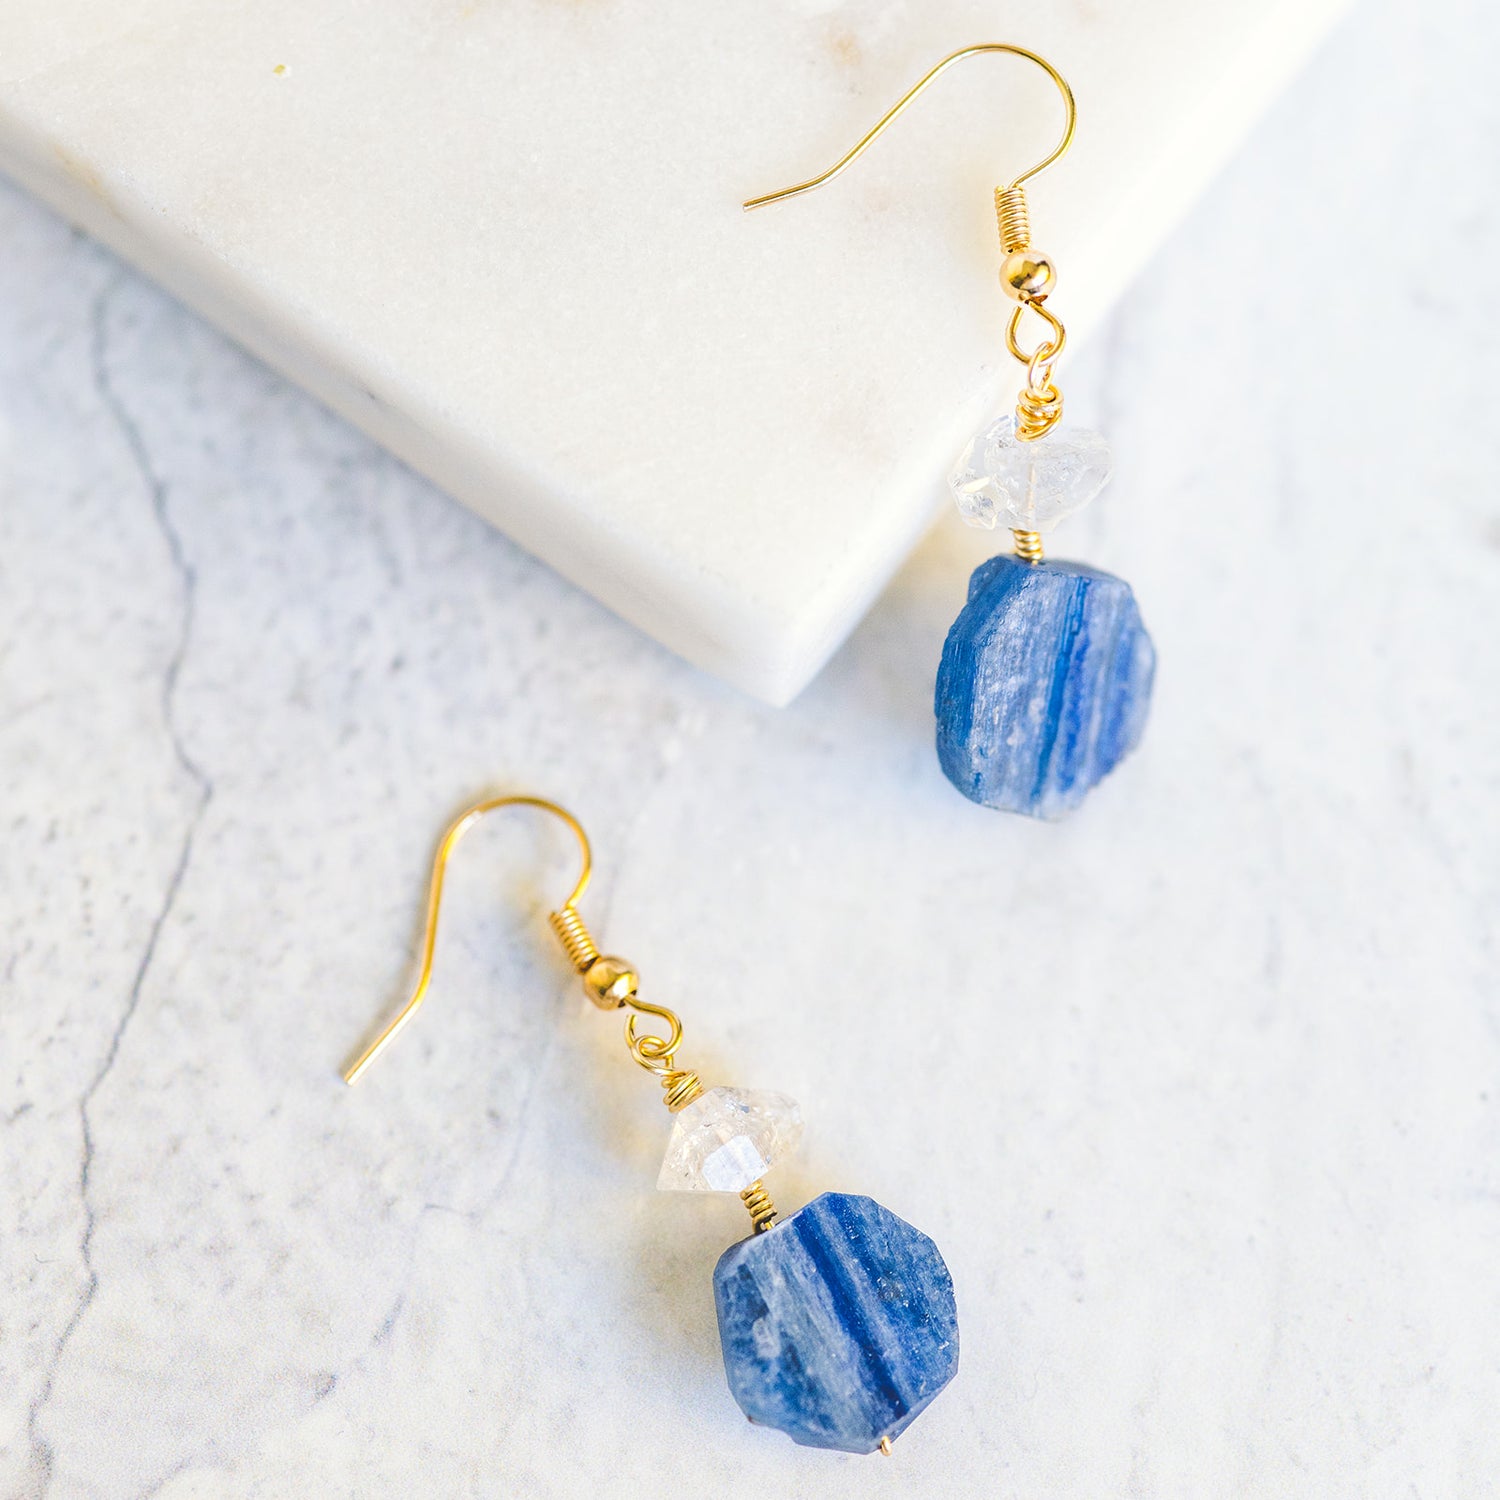 Wire Wrapped Crystal Earrings - Kyanite and Herkimer Diamond